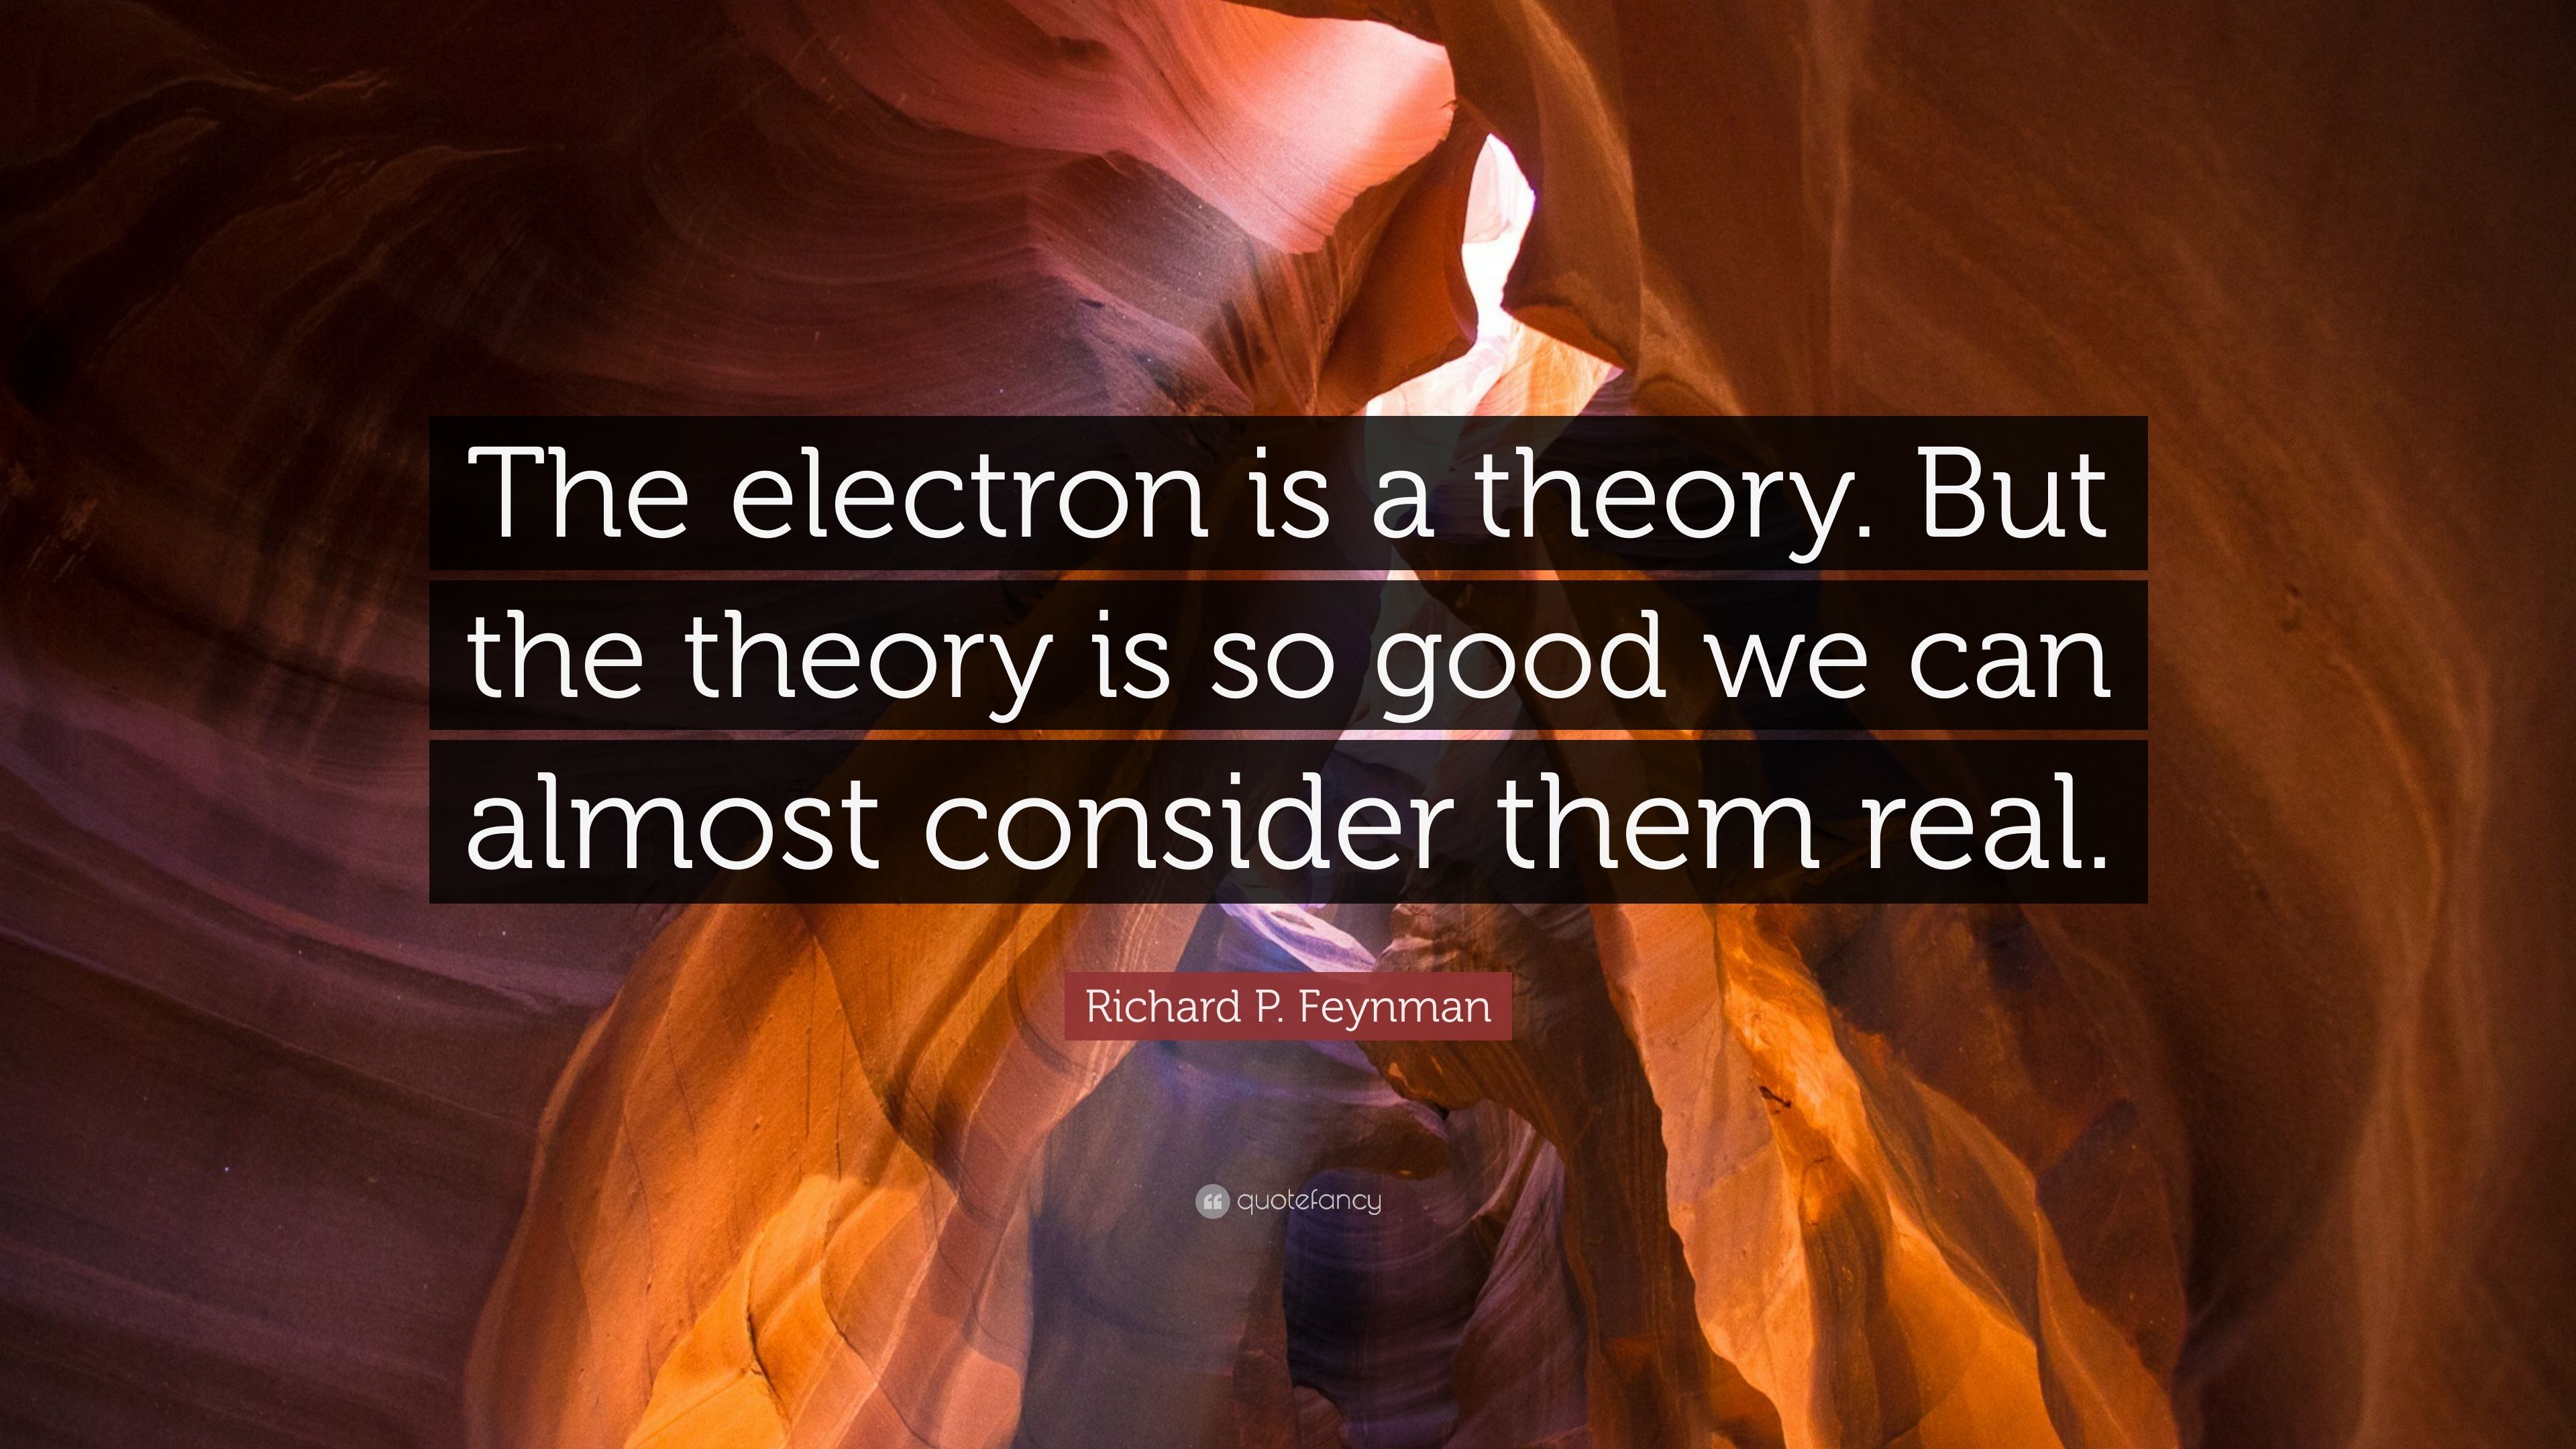 Richard P. Feynman Quote: “The electron is a theory. But the theory is so good we can almost consider them real.” (12 wallpaper)